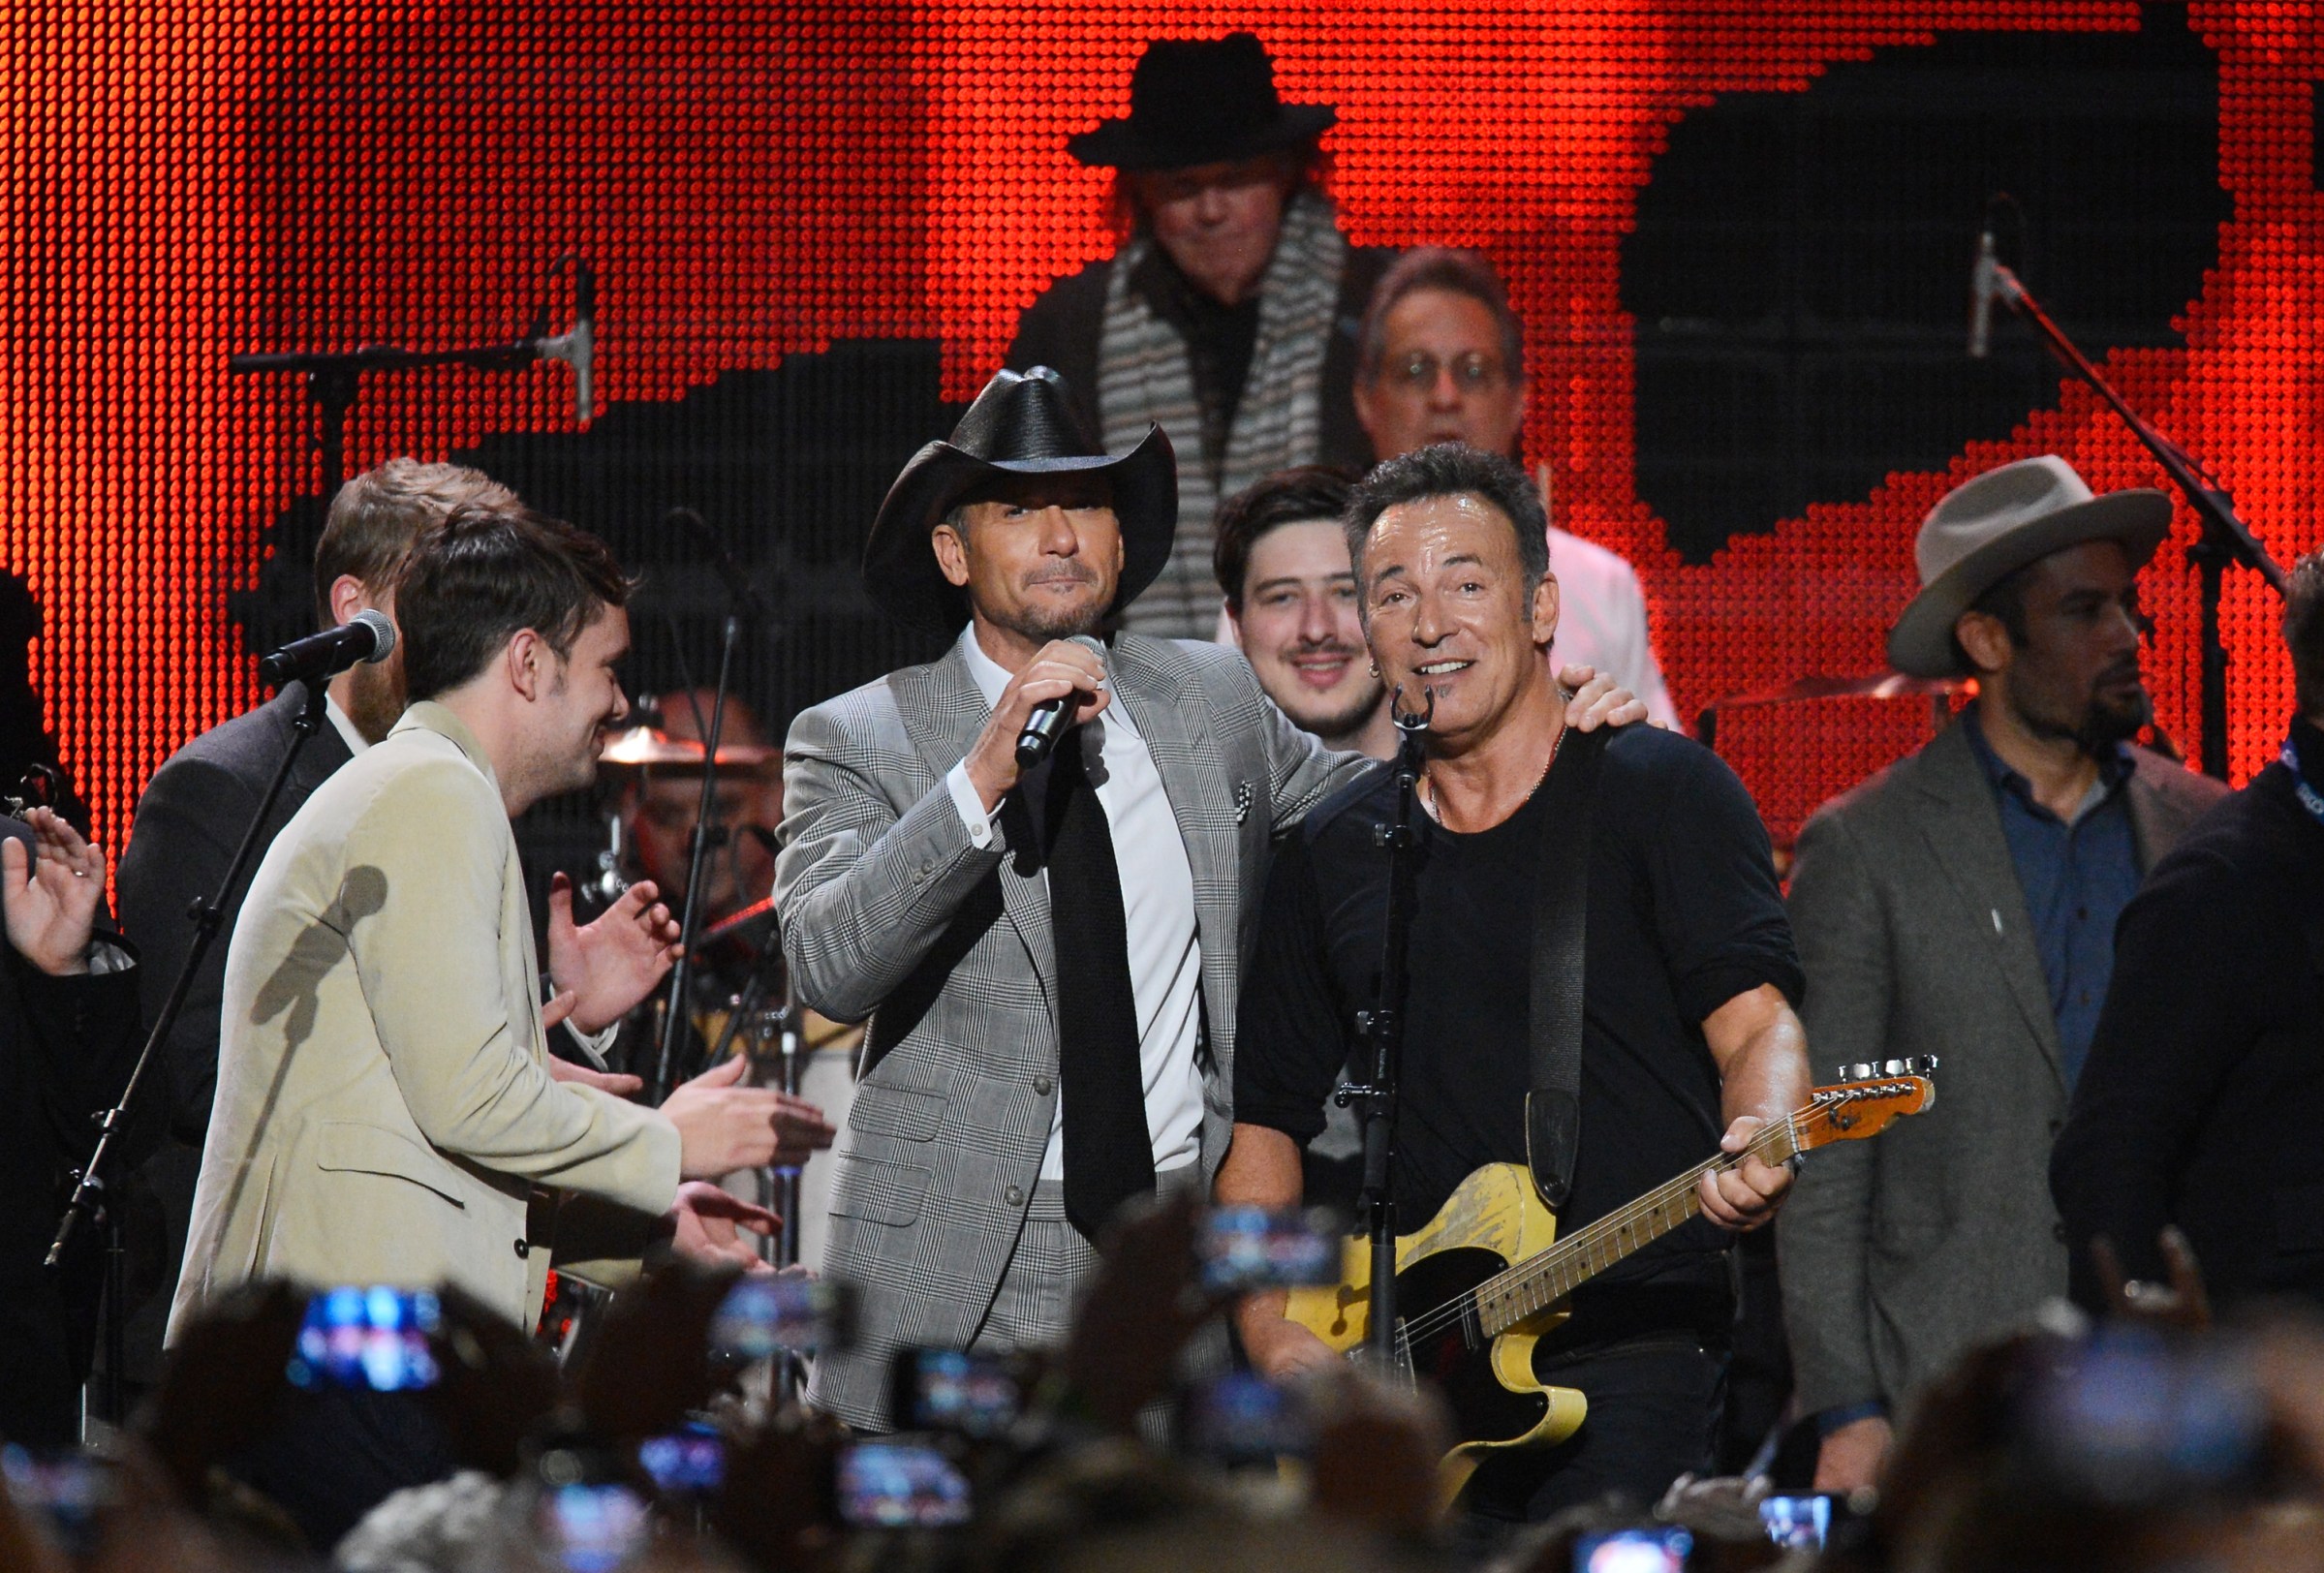 Musicians Ben Lovett, Tim McGraw, Neil Young, Marcus Mumford, drummer Max Weinberg, honoree Bruce Springsteen and singer Ben Harper perform onstage at The 2013 MusiCares Person Of The Year Gala Honoring Bruce Springsteen. Image Courtesy of Recording Academy®/Photo Kevork Djansezian by Getty Images© 2021